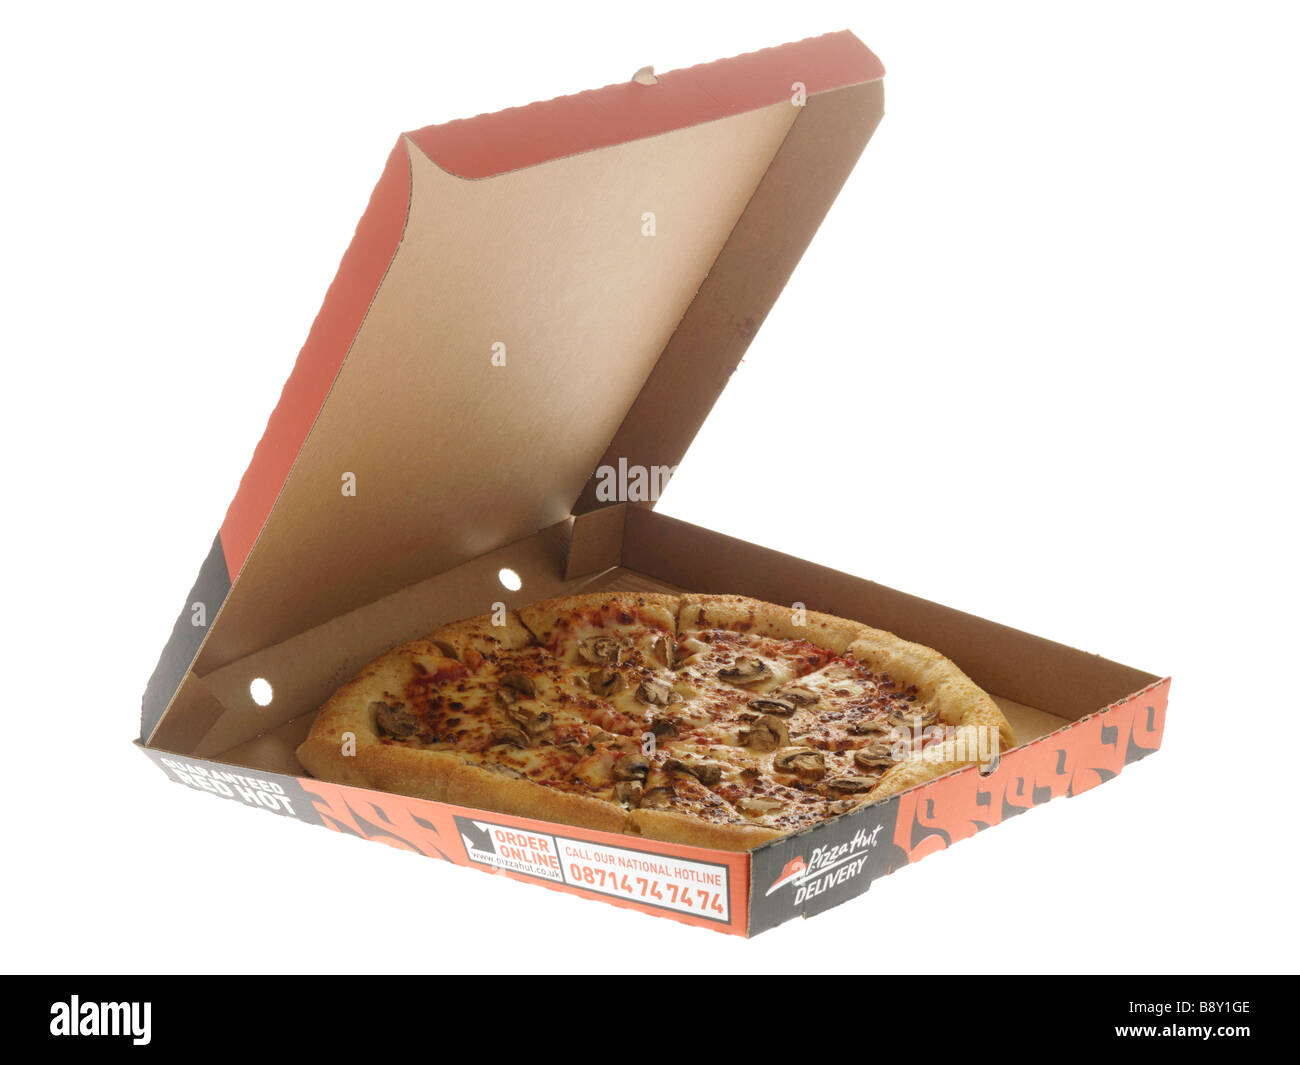 Still life photograph of pizza in Pizza Hut box with side dishes